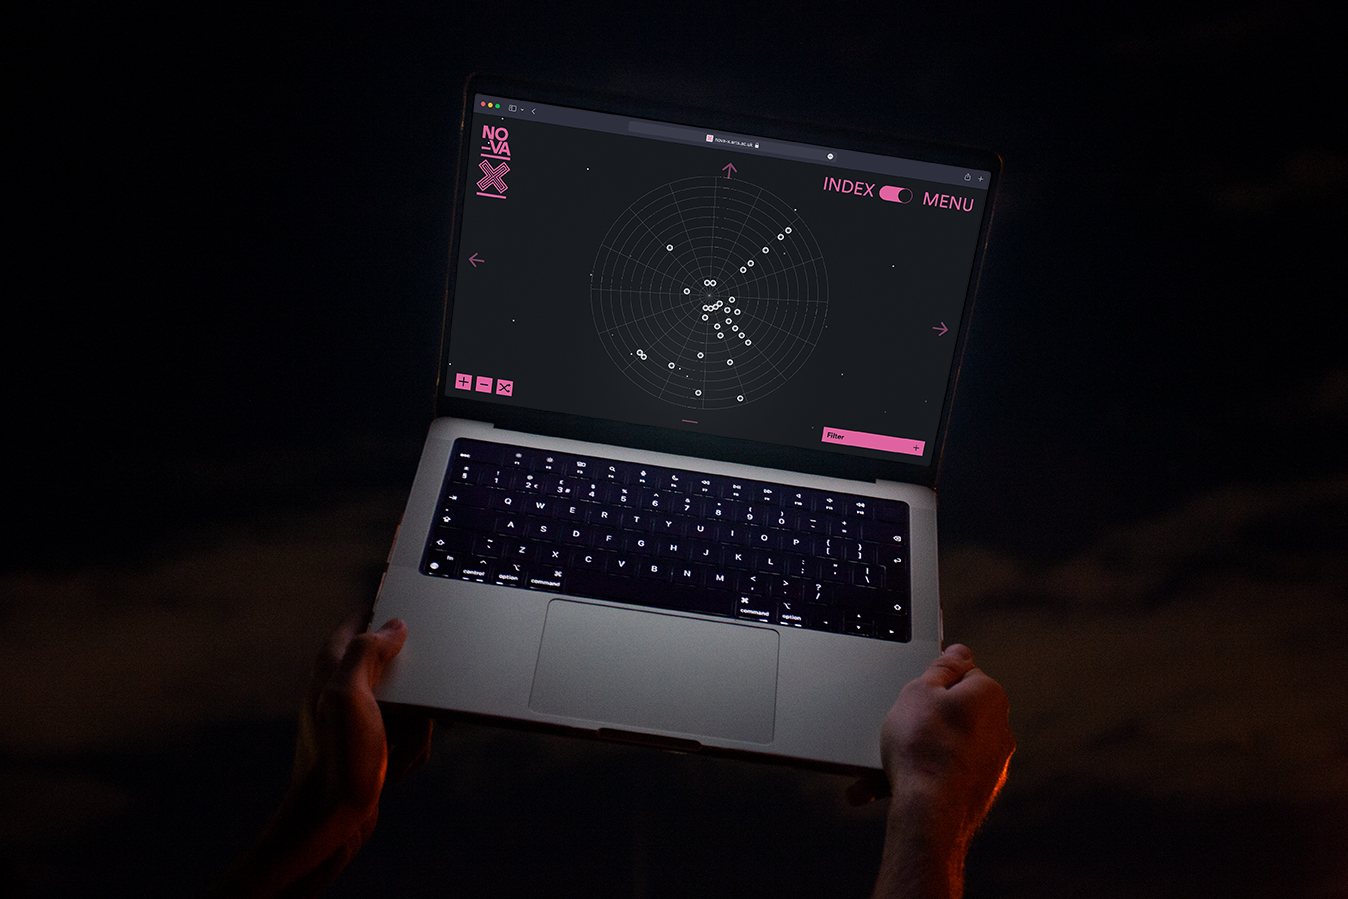 alt: Two hands holding up a laptop in front of the night sky, displayed on the laptop is the Nova X website homepage.